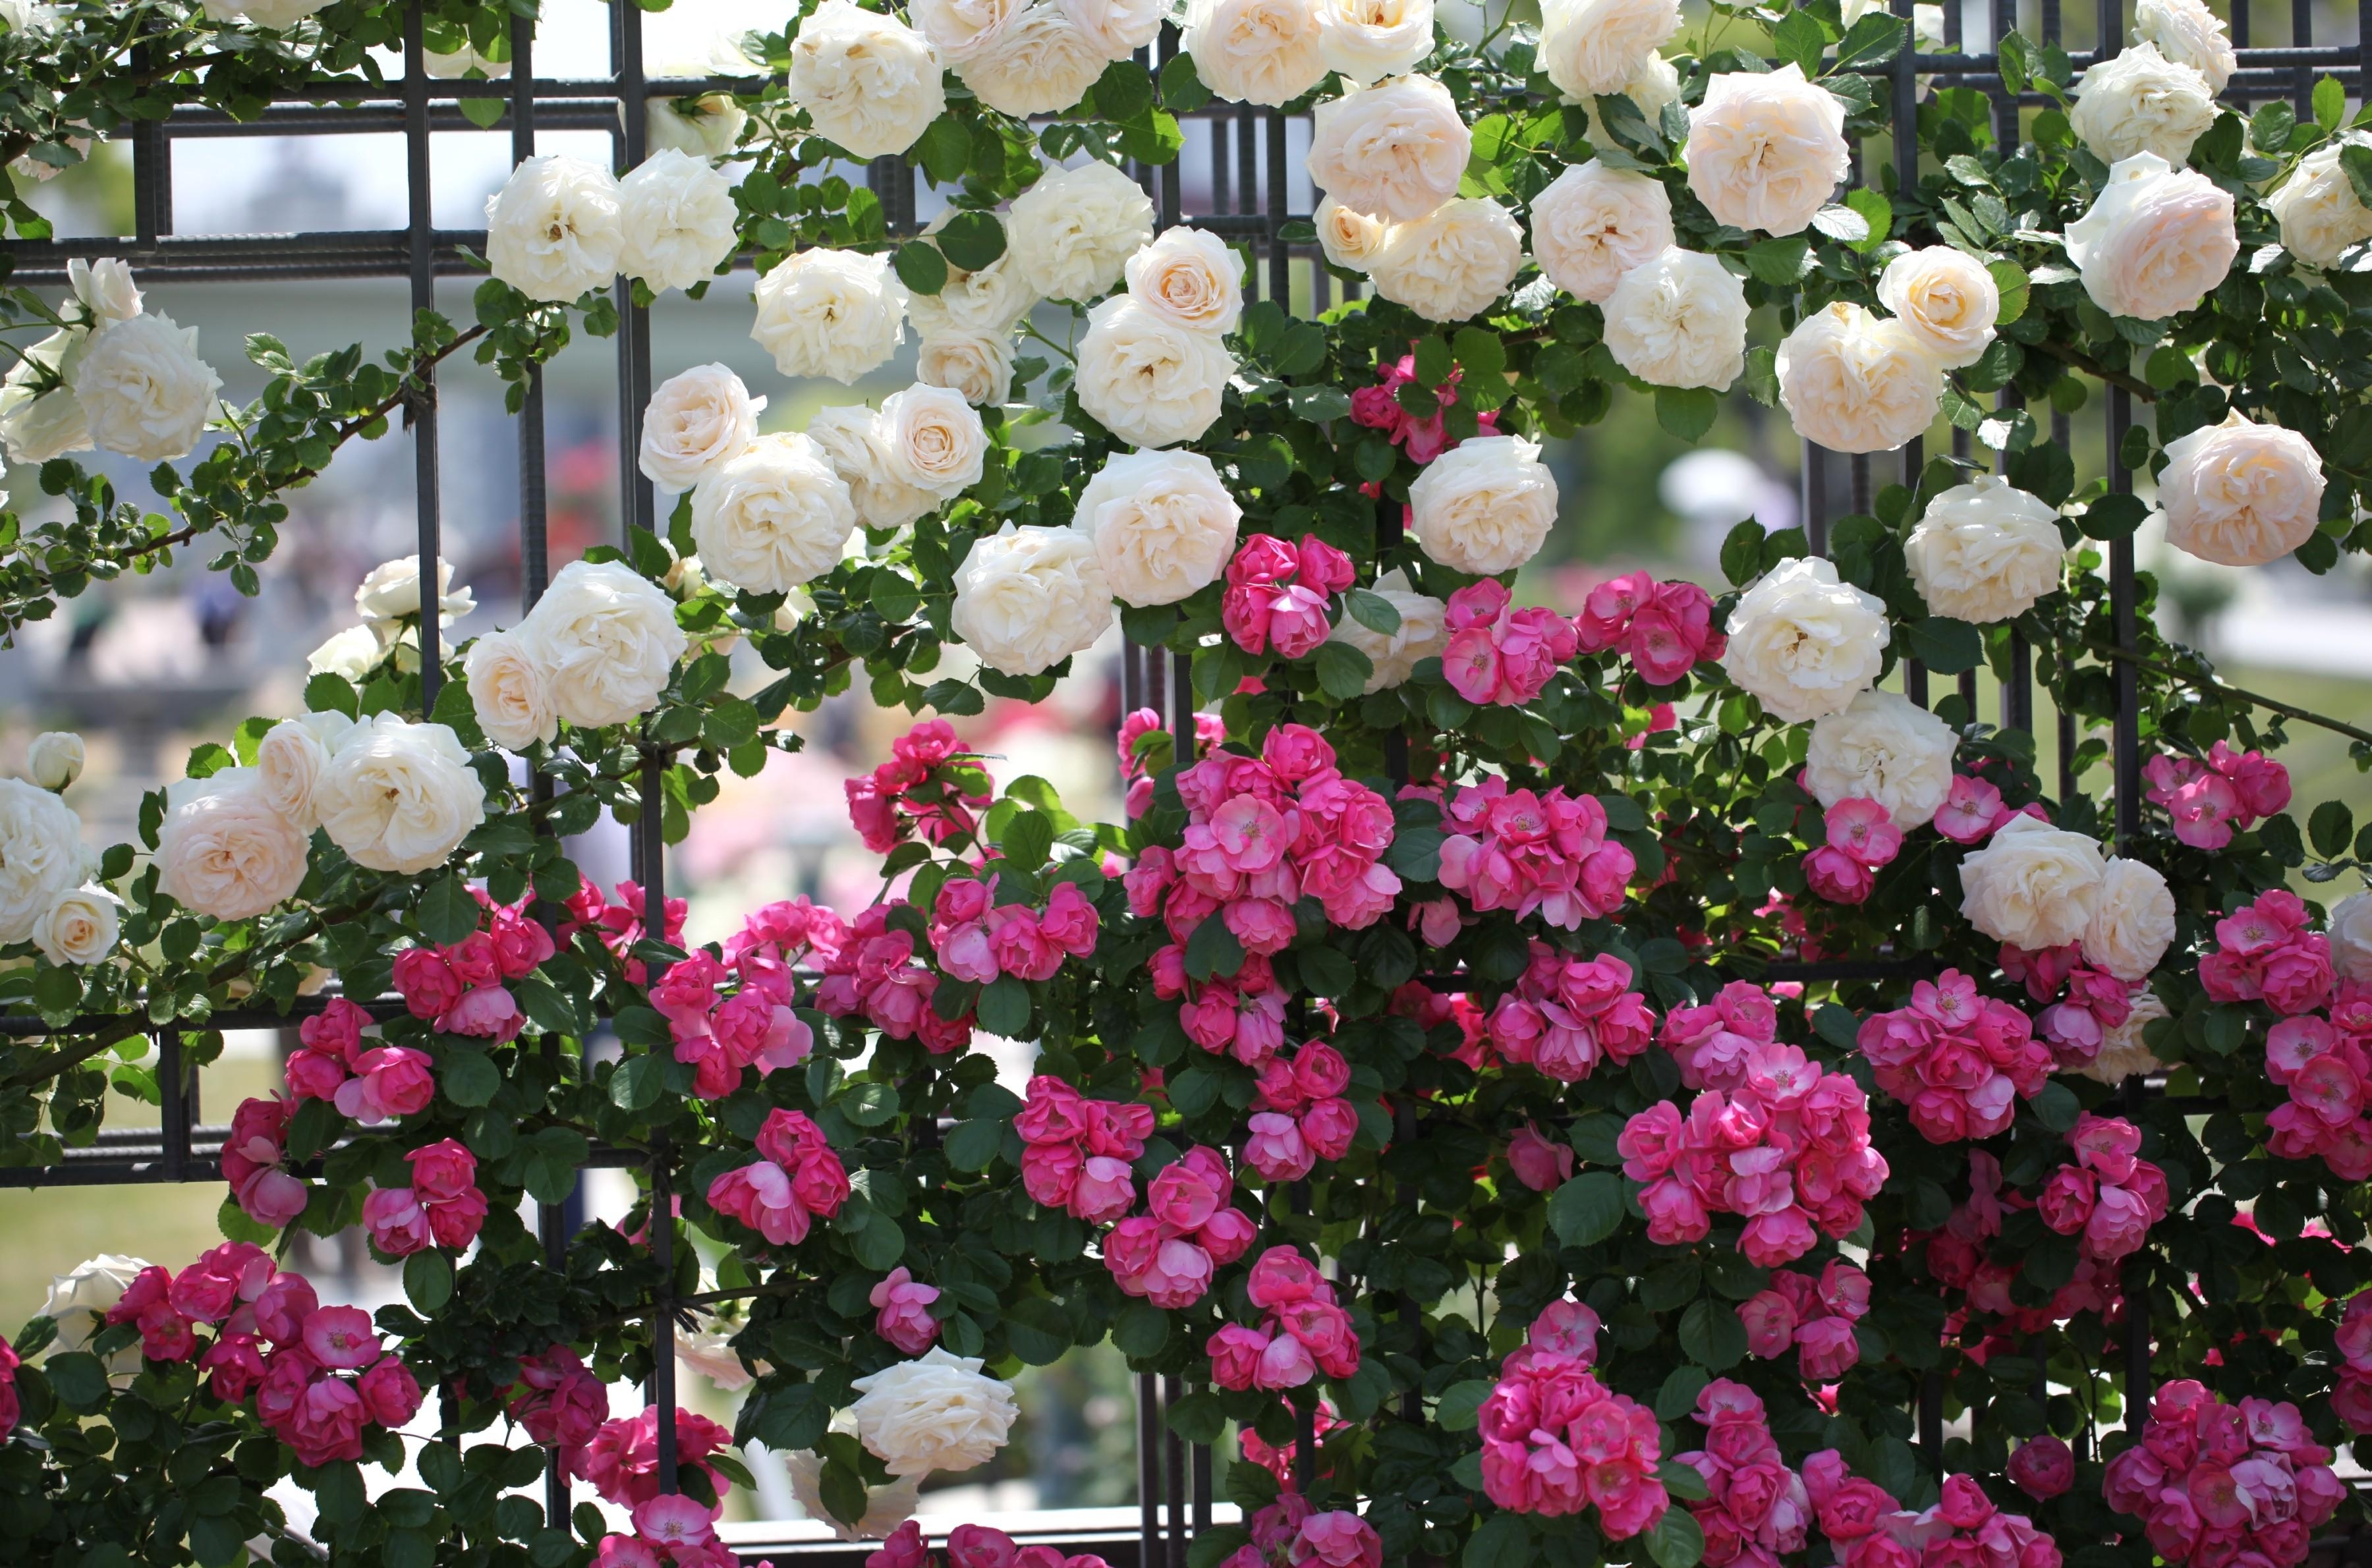 it's beautiful, roses, flowers, greens, fence, handsomely, different High Definition image